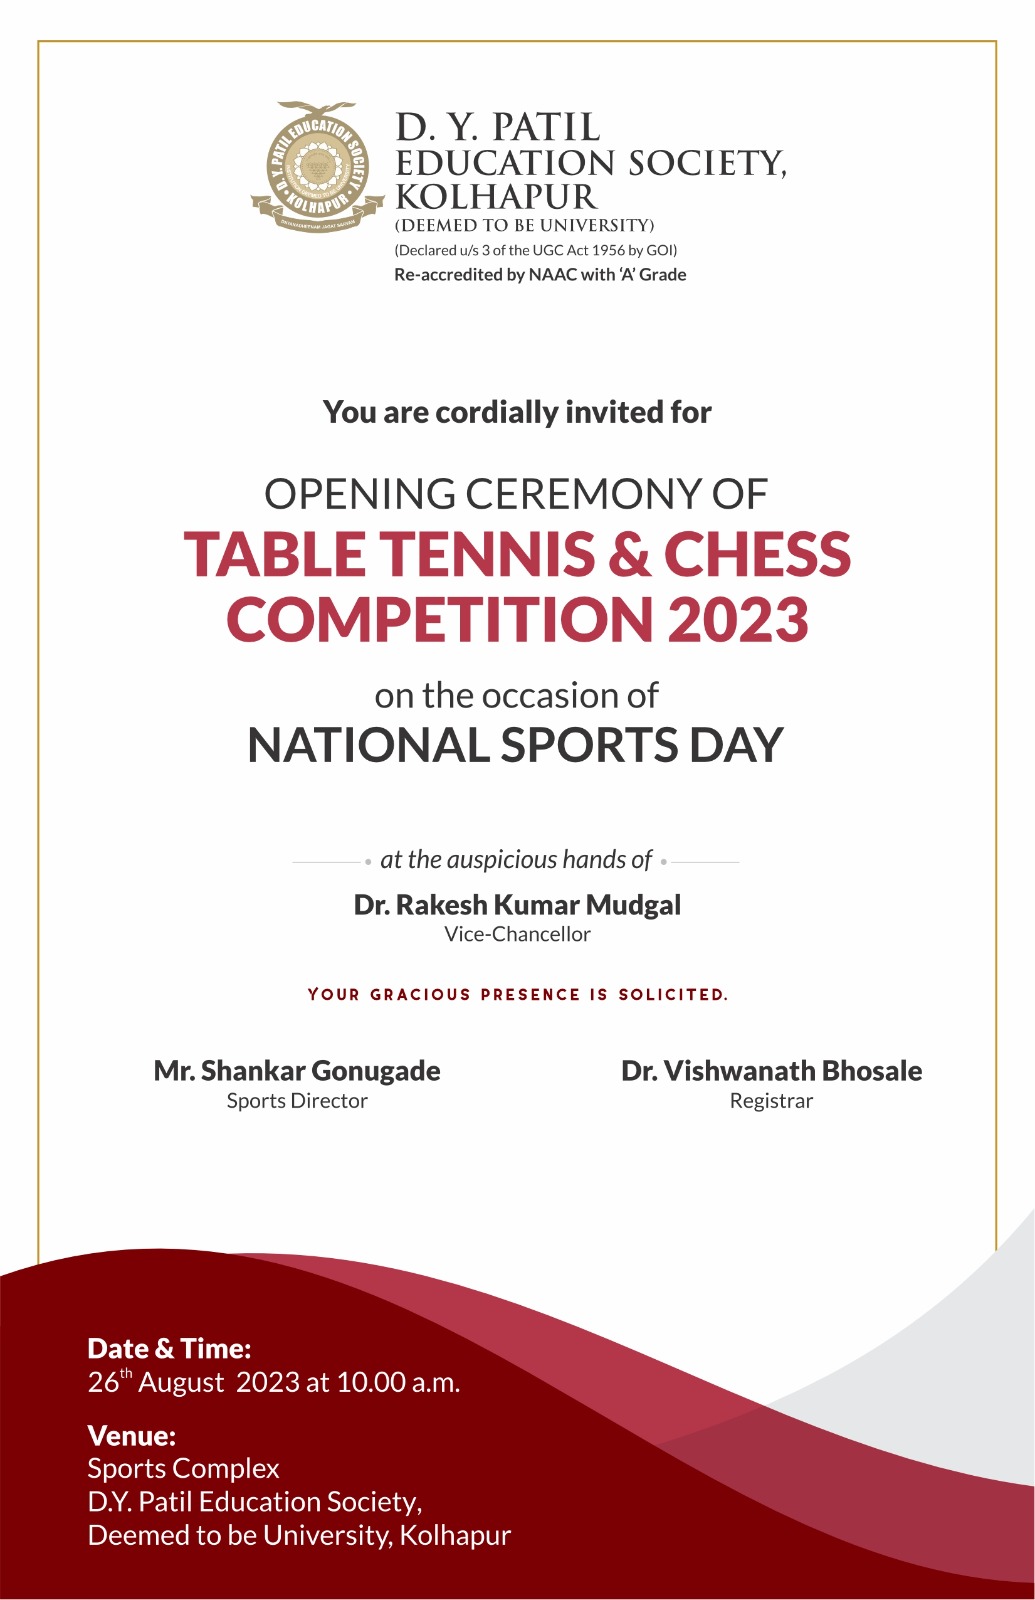 Table Tennis & Chess Competition 2023 on occasion of National Sports Day